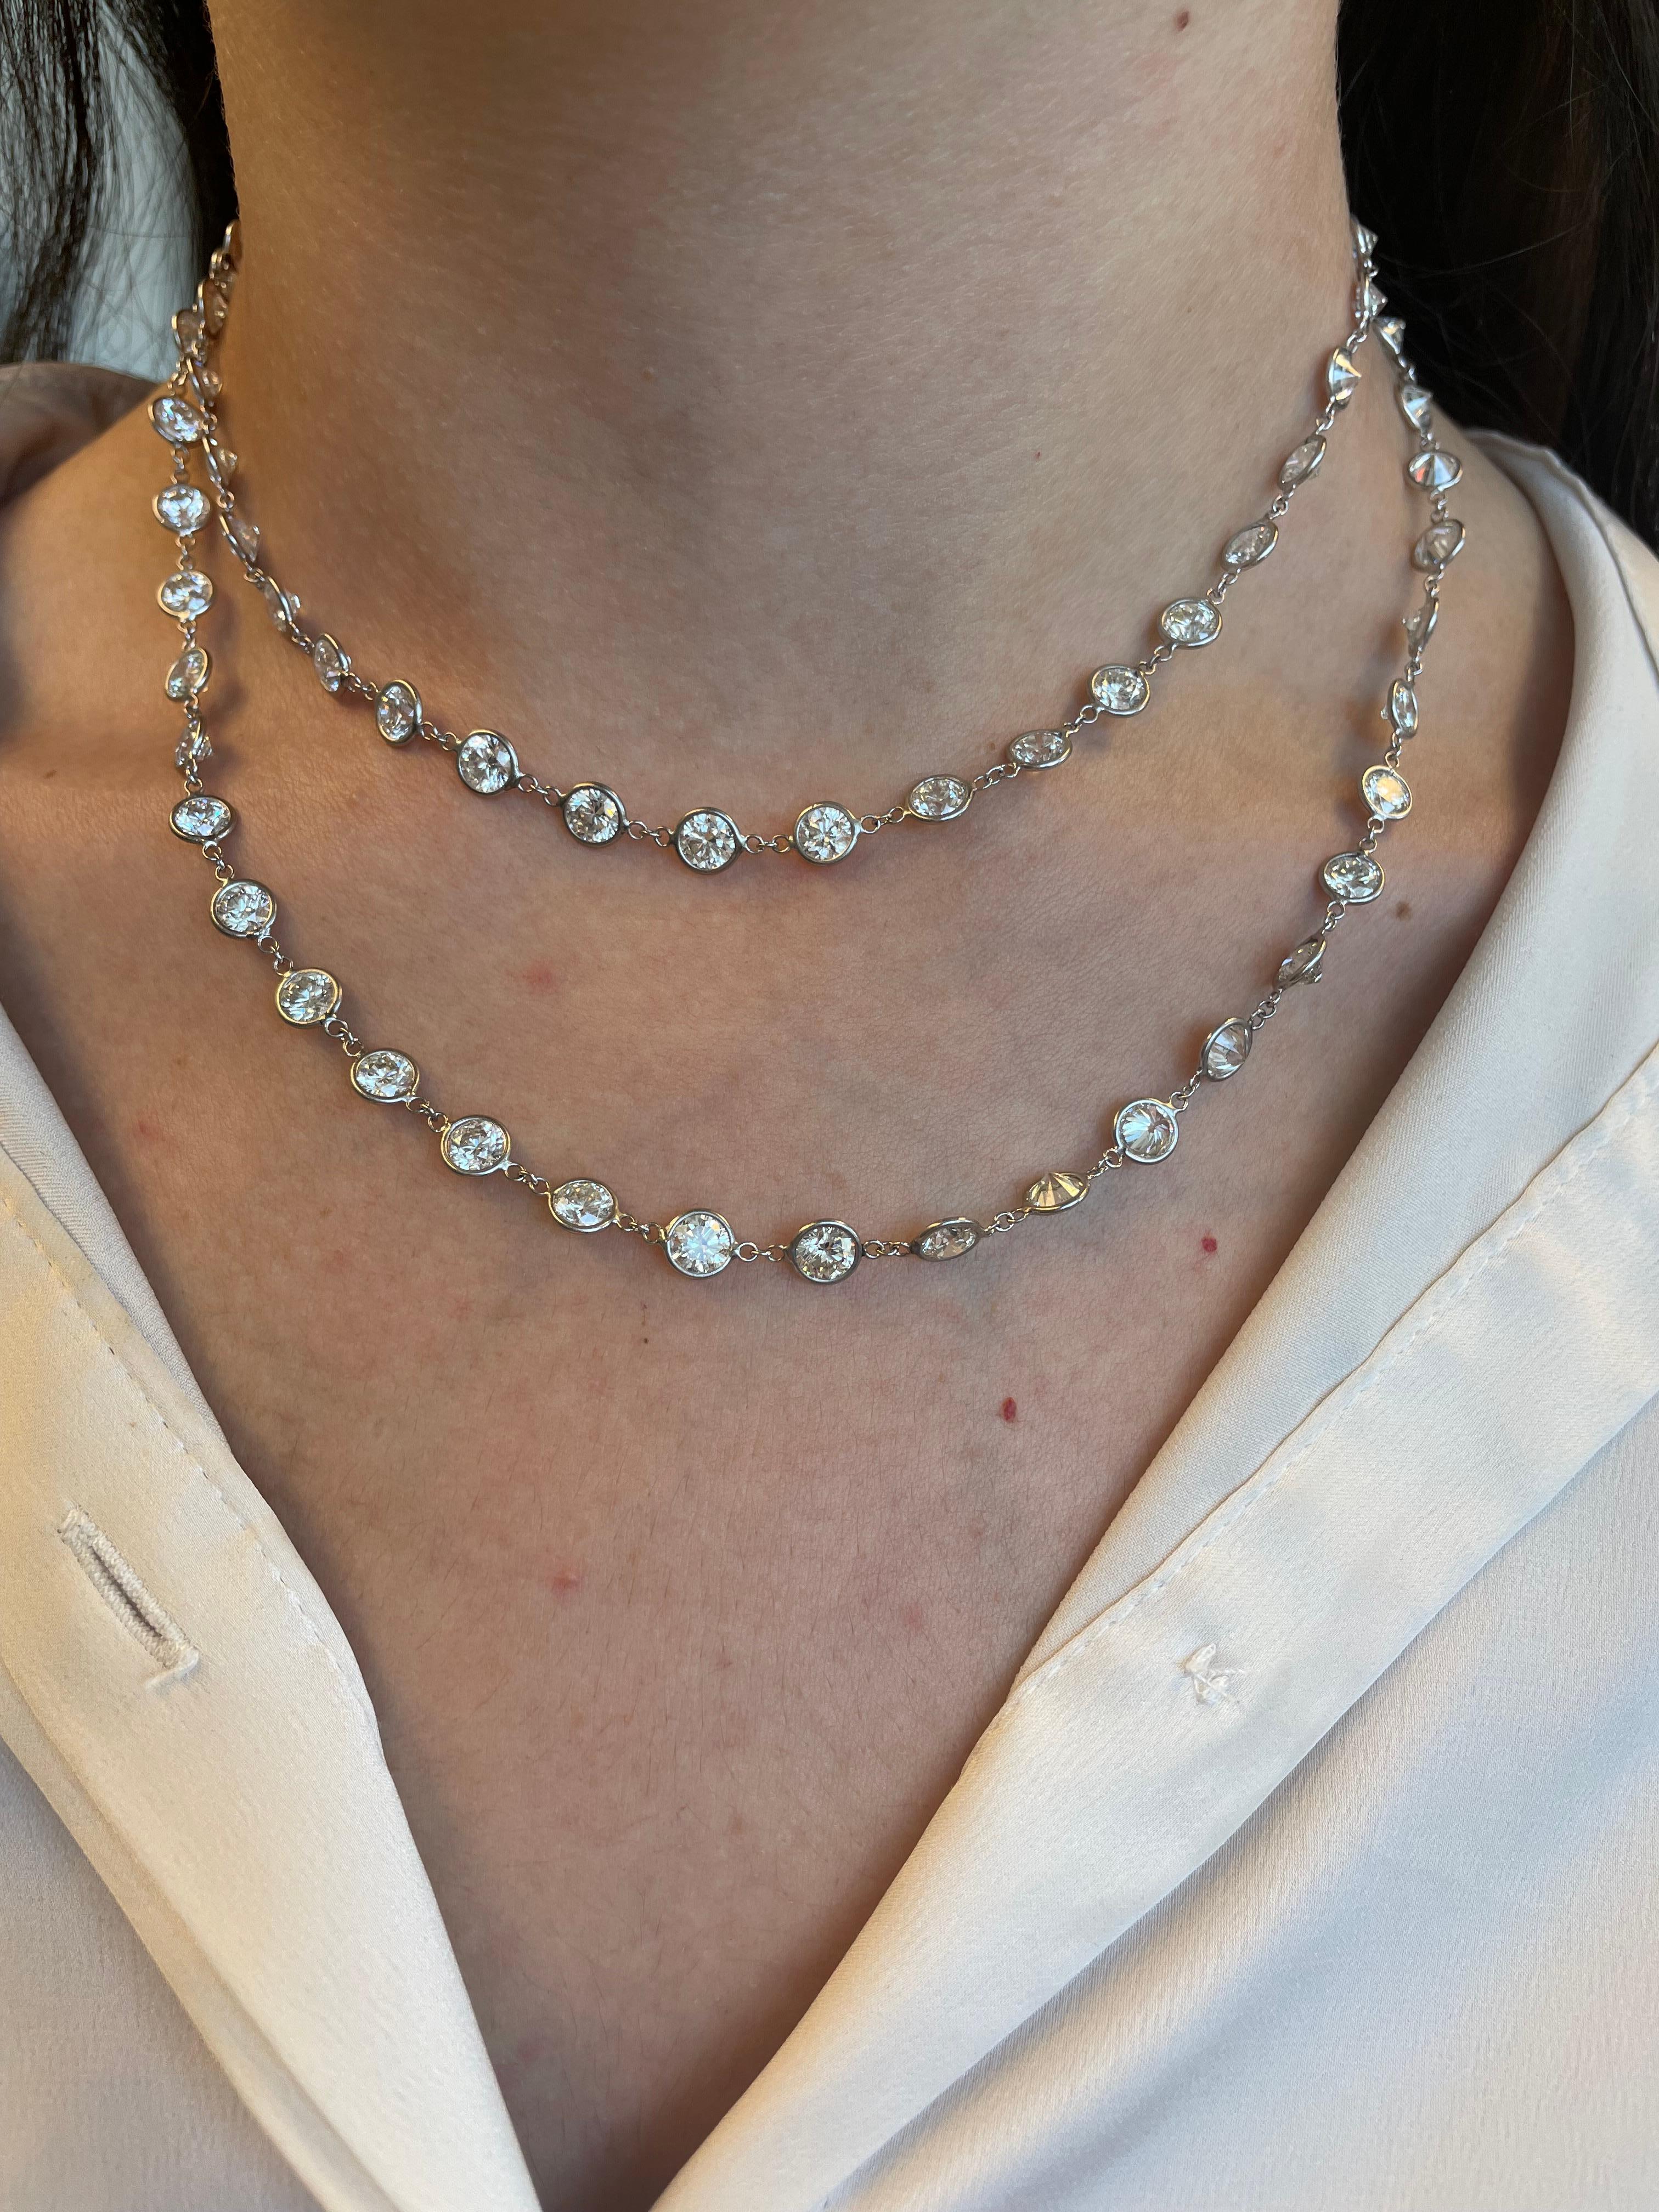 Exquisite round brilliant diamonds by the yard modern necklace. By Alexander Beverly Hills.
75 round brilliant diamonds each stone averaging 0.50ct, 37.50 carats total. Approximately G/H color and SI clarity. Bezel set in 18k white gold.